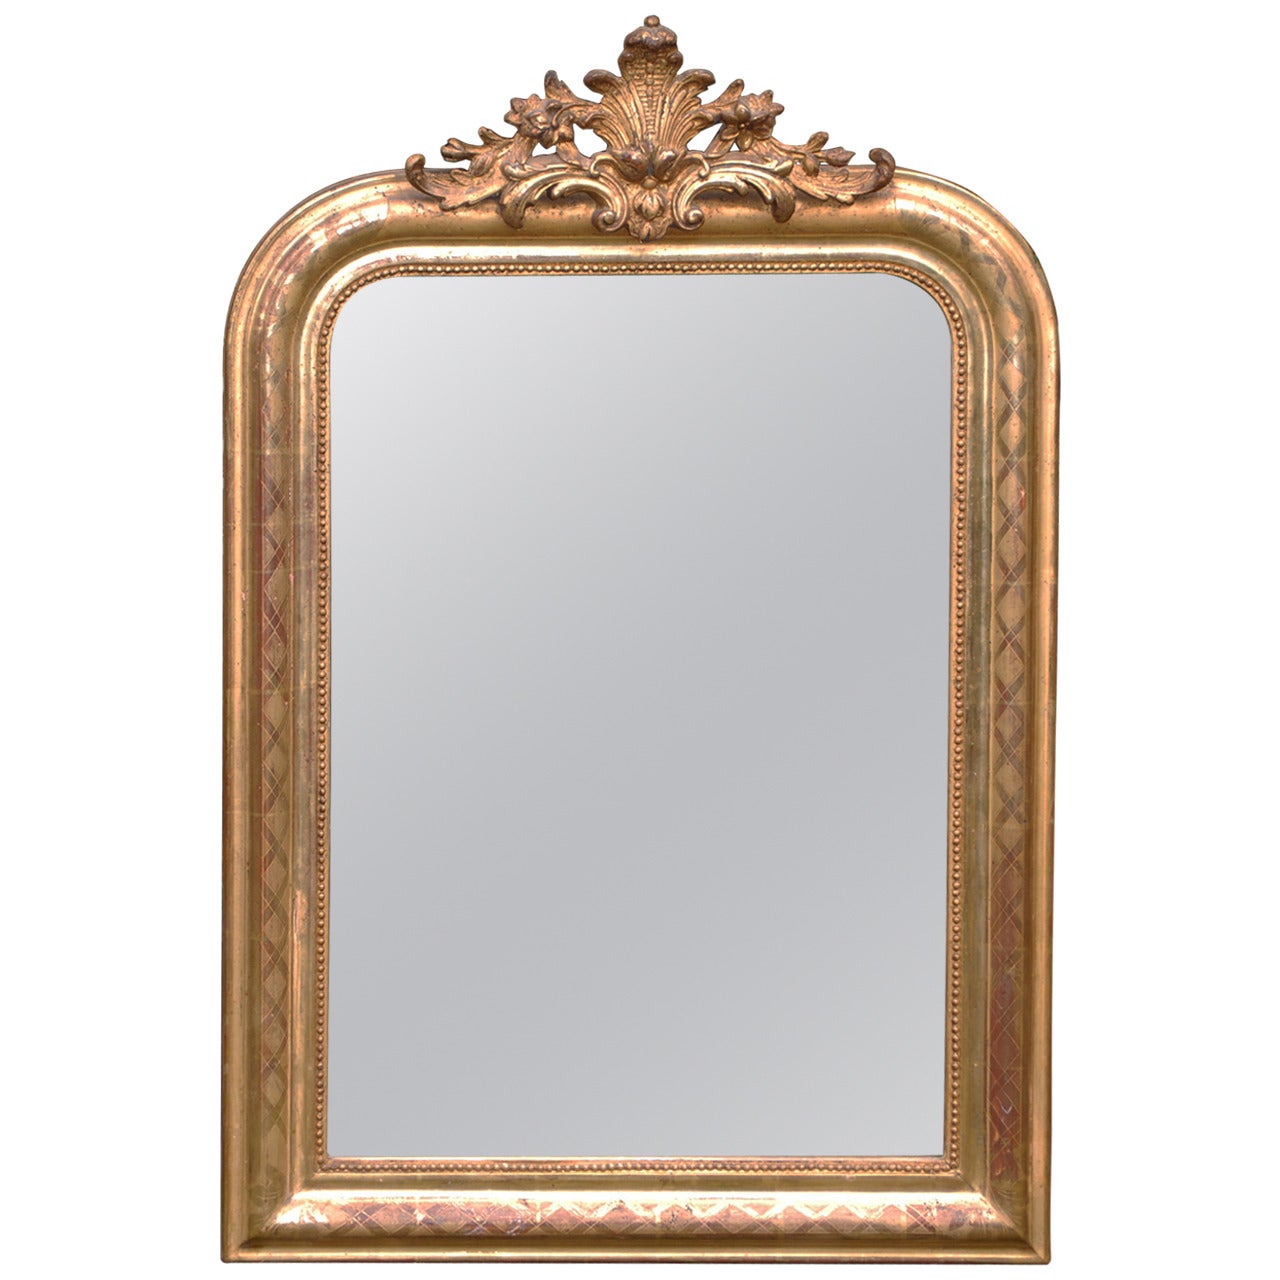 19th Century French Gold Gilded Mirror